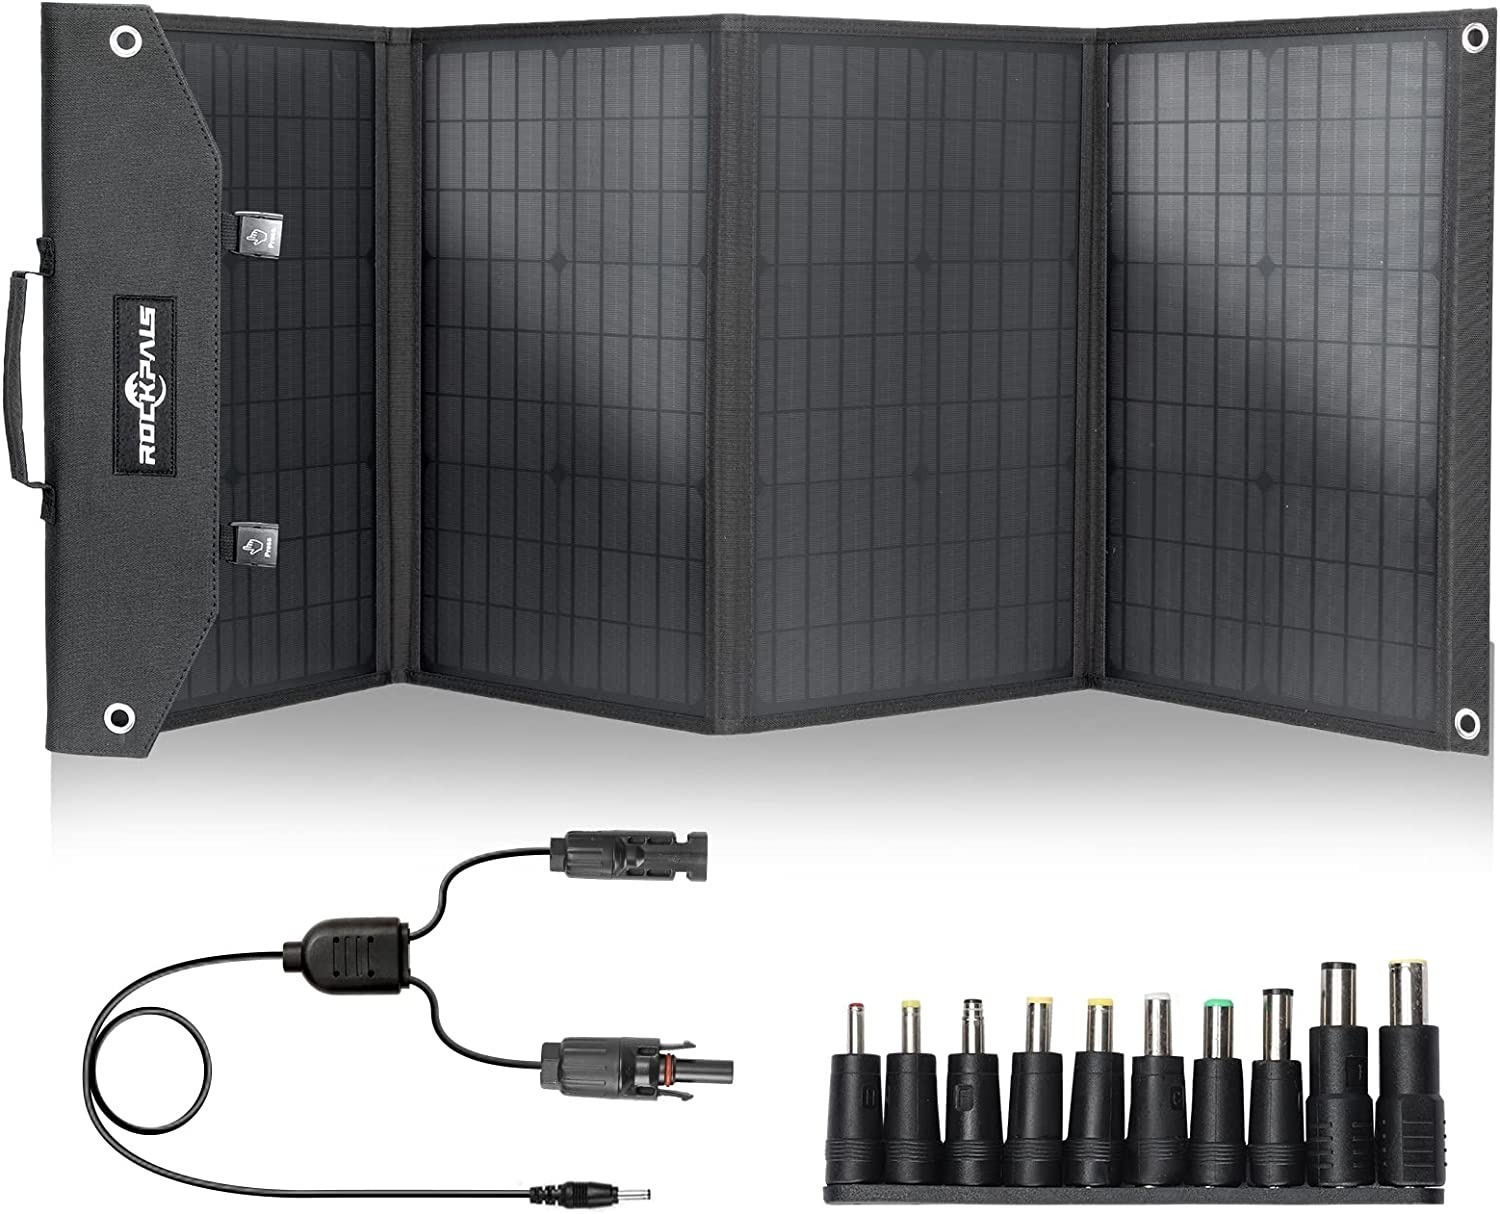 Rockpals 100W Fold Out Solar Panel Charger $115 + Free Shipping